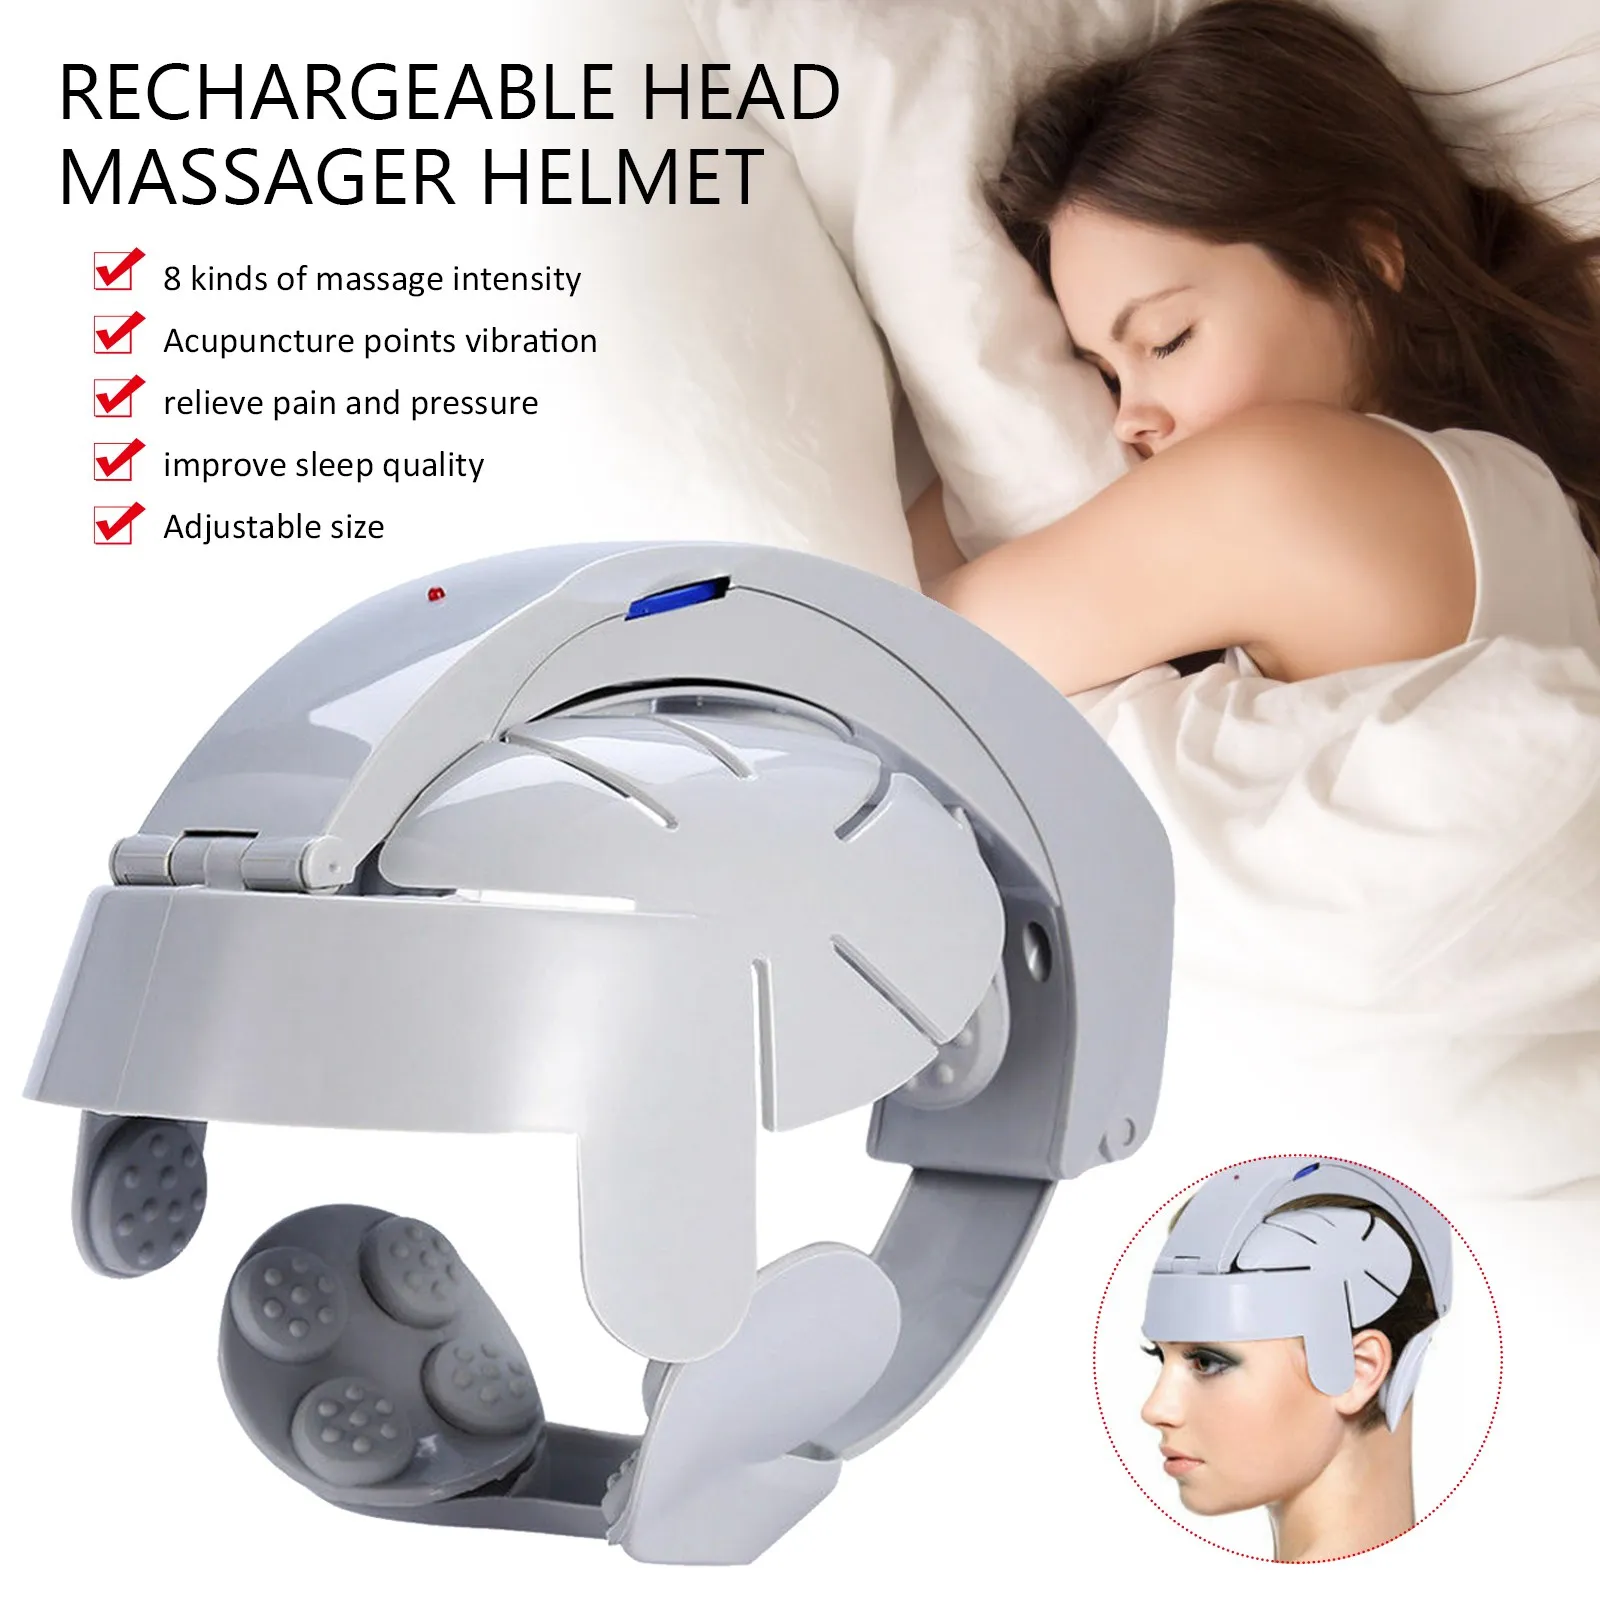 

Rechargeable Head Massager Helmet Scalp Brain Relax Vibration Stimulator Electric Acupoint Heater For Home Office Use